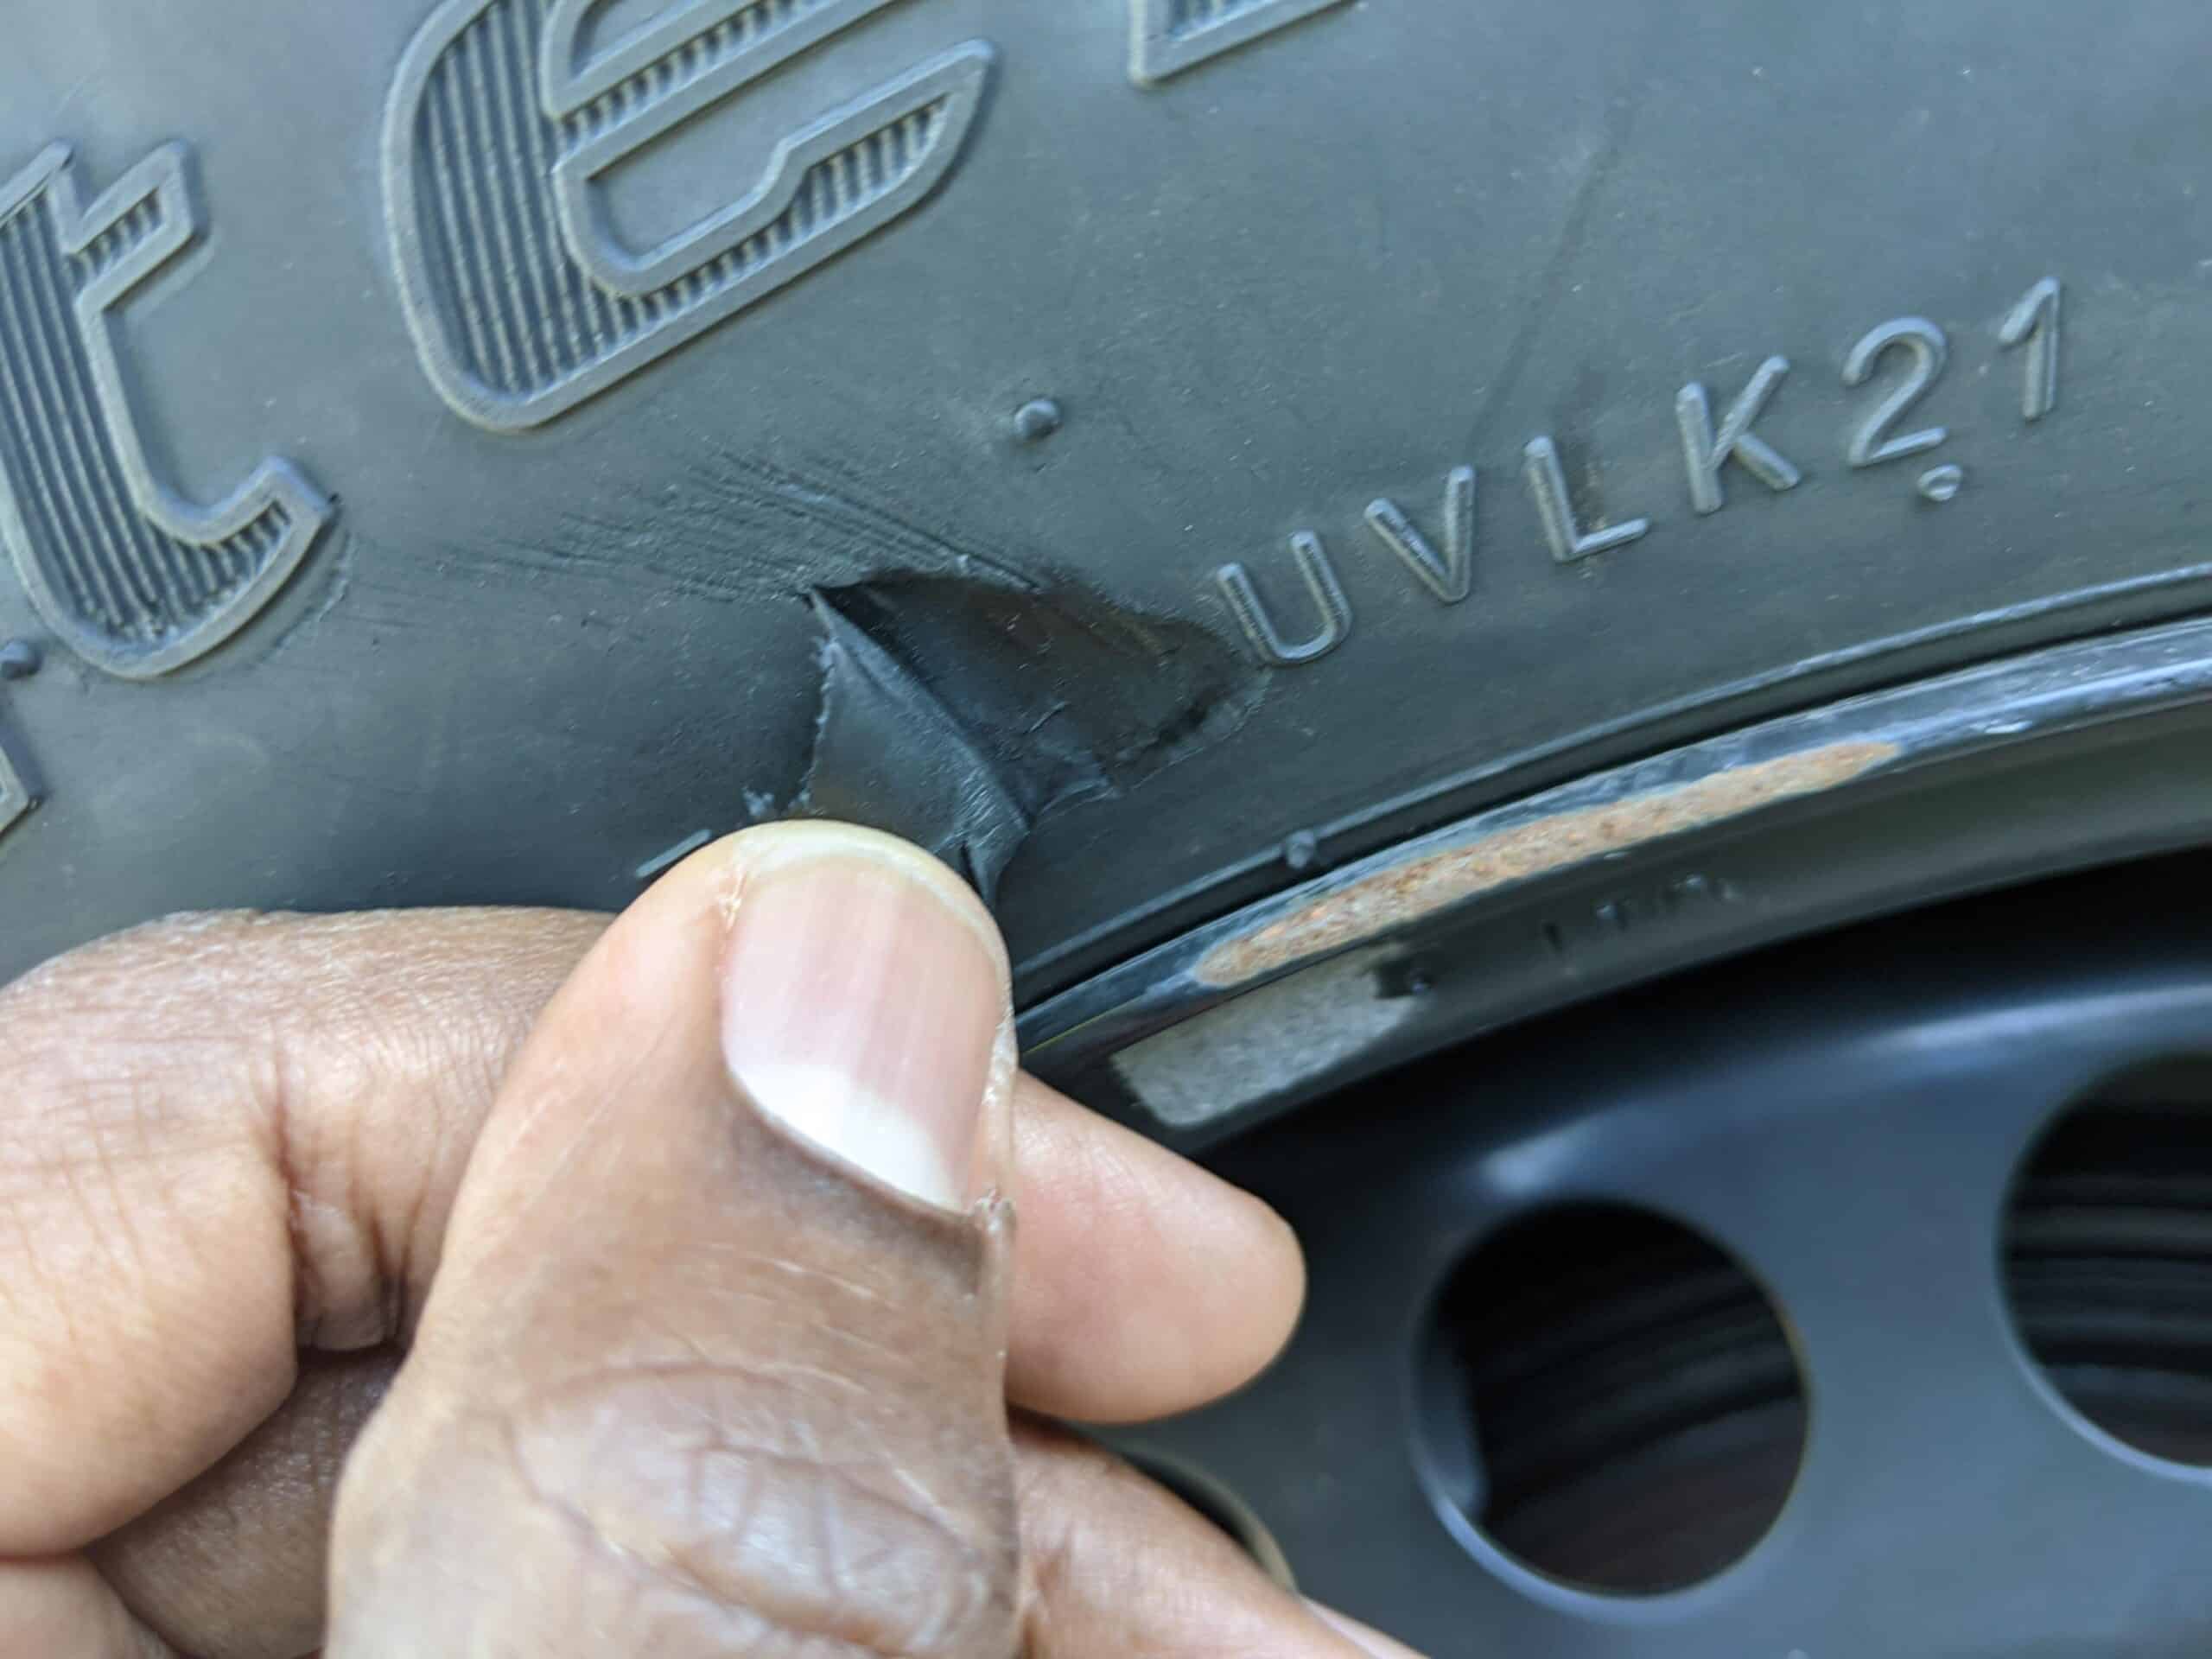 Tire Sidewall Damage: Causes, Risks, and Repair Options